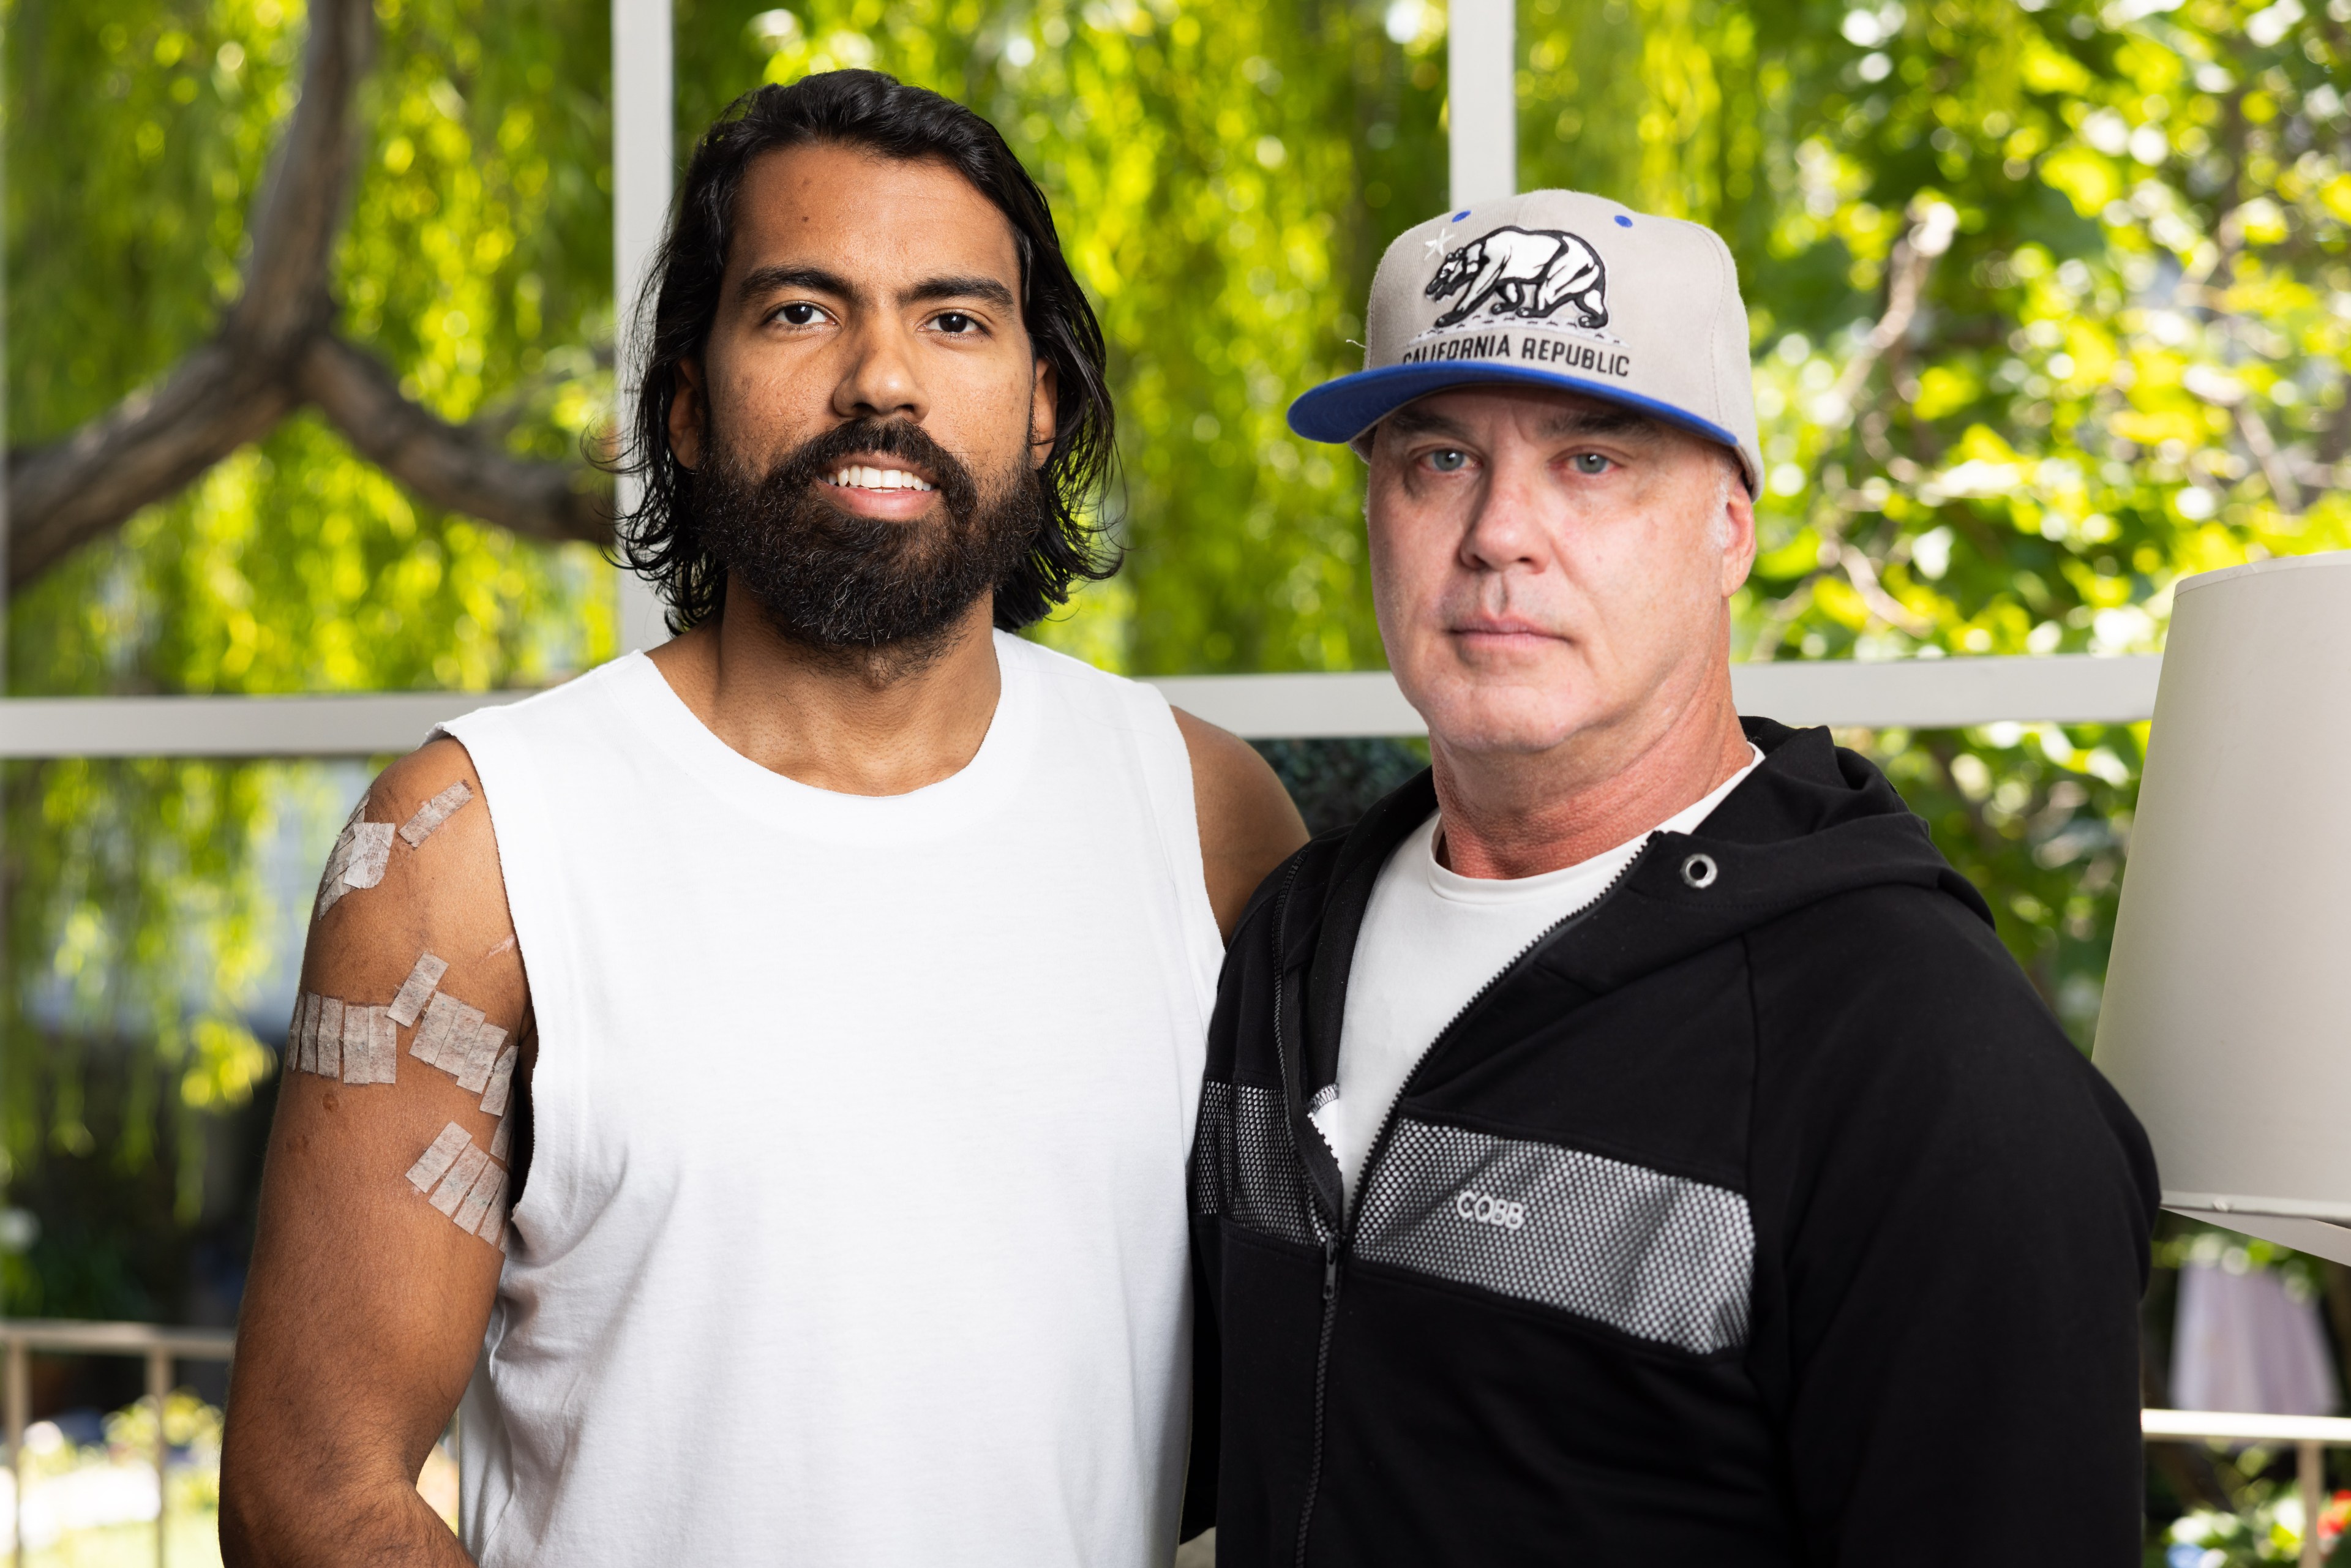 Two men standing together; the left man has long hair and a beard, with medical tape on his arm, wearing a white sleeveless shirt. The right man wears a cap and a black hoodie.